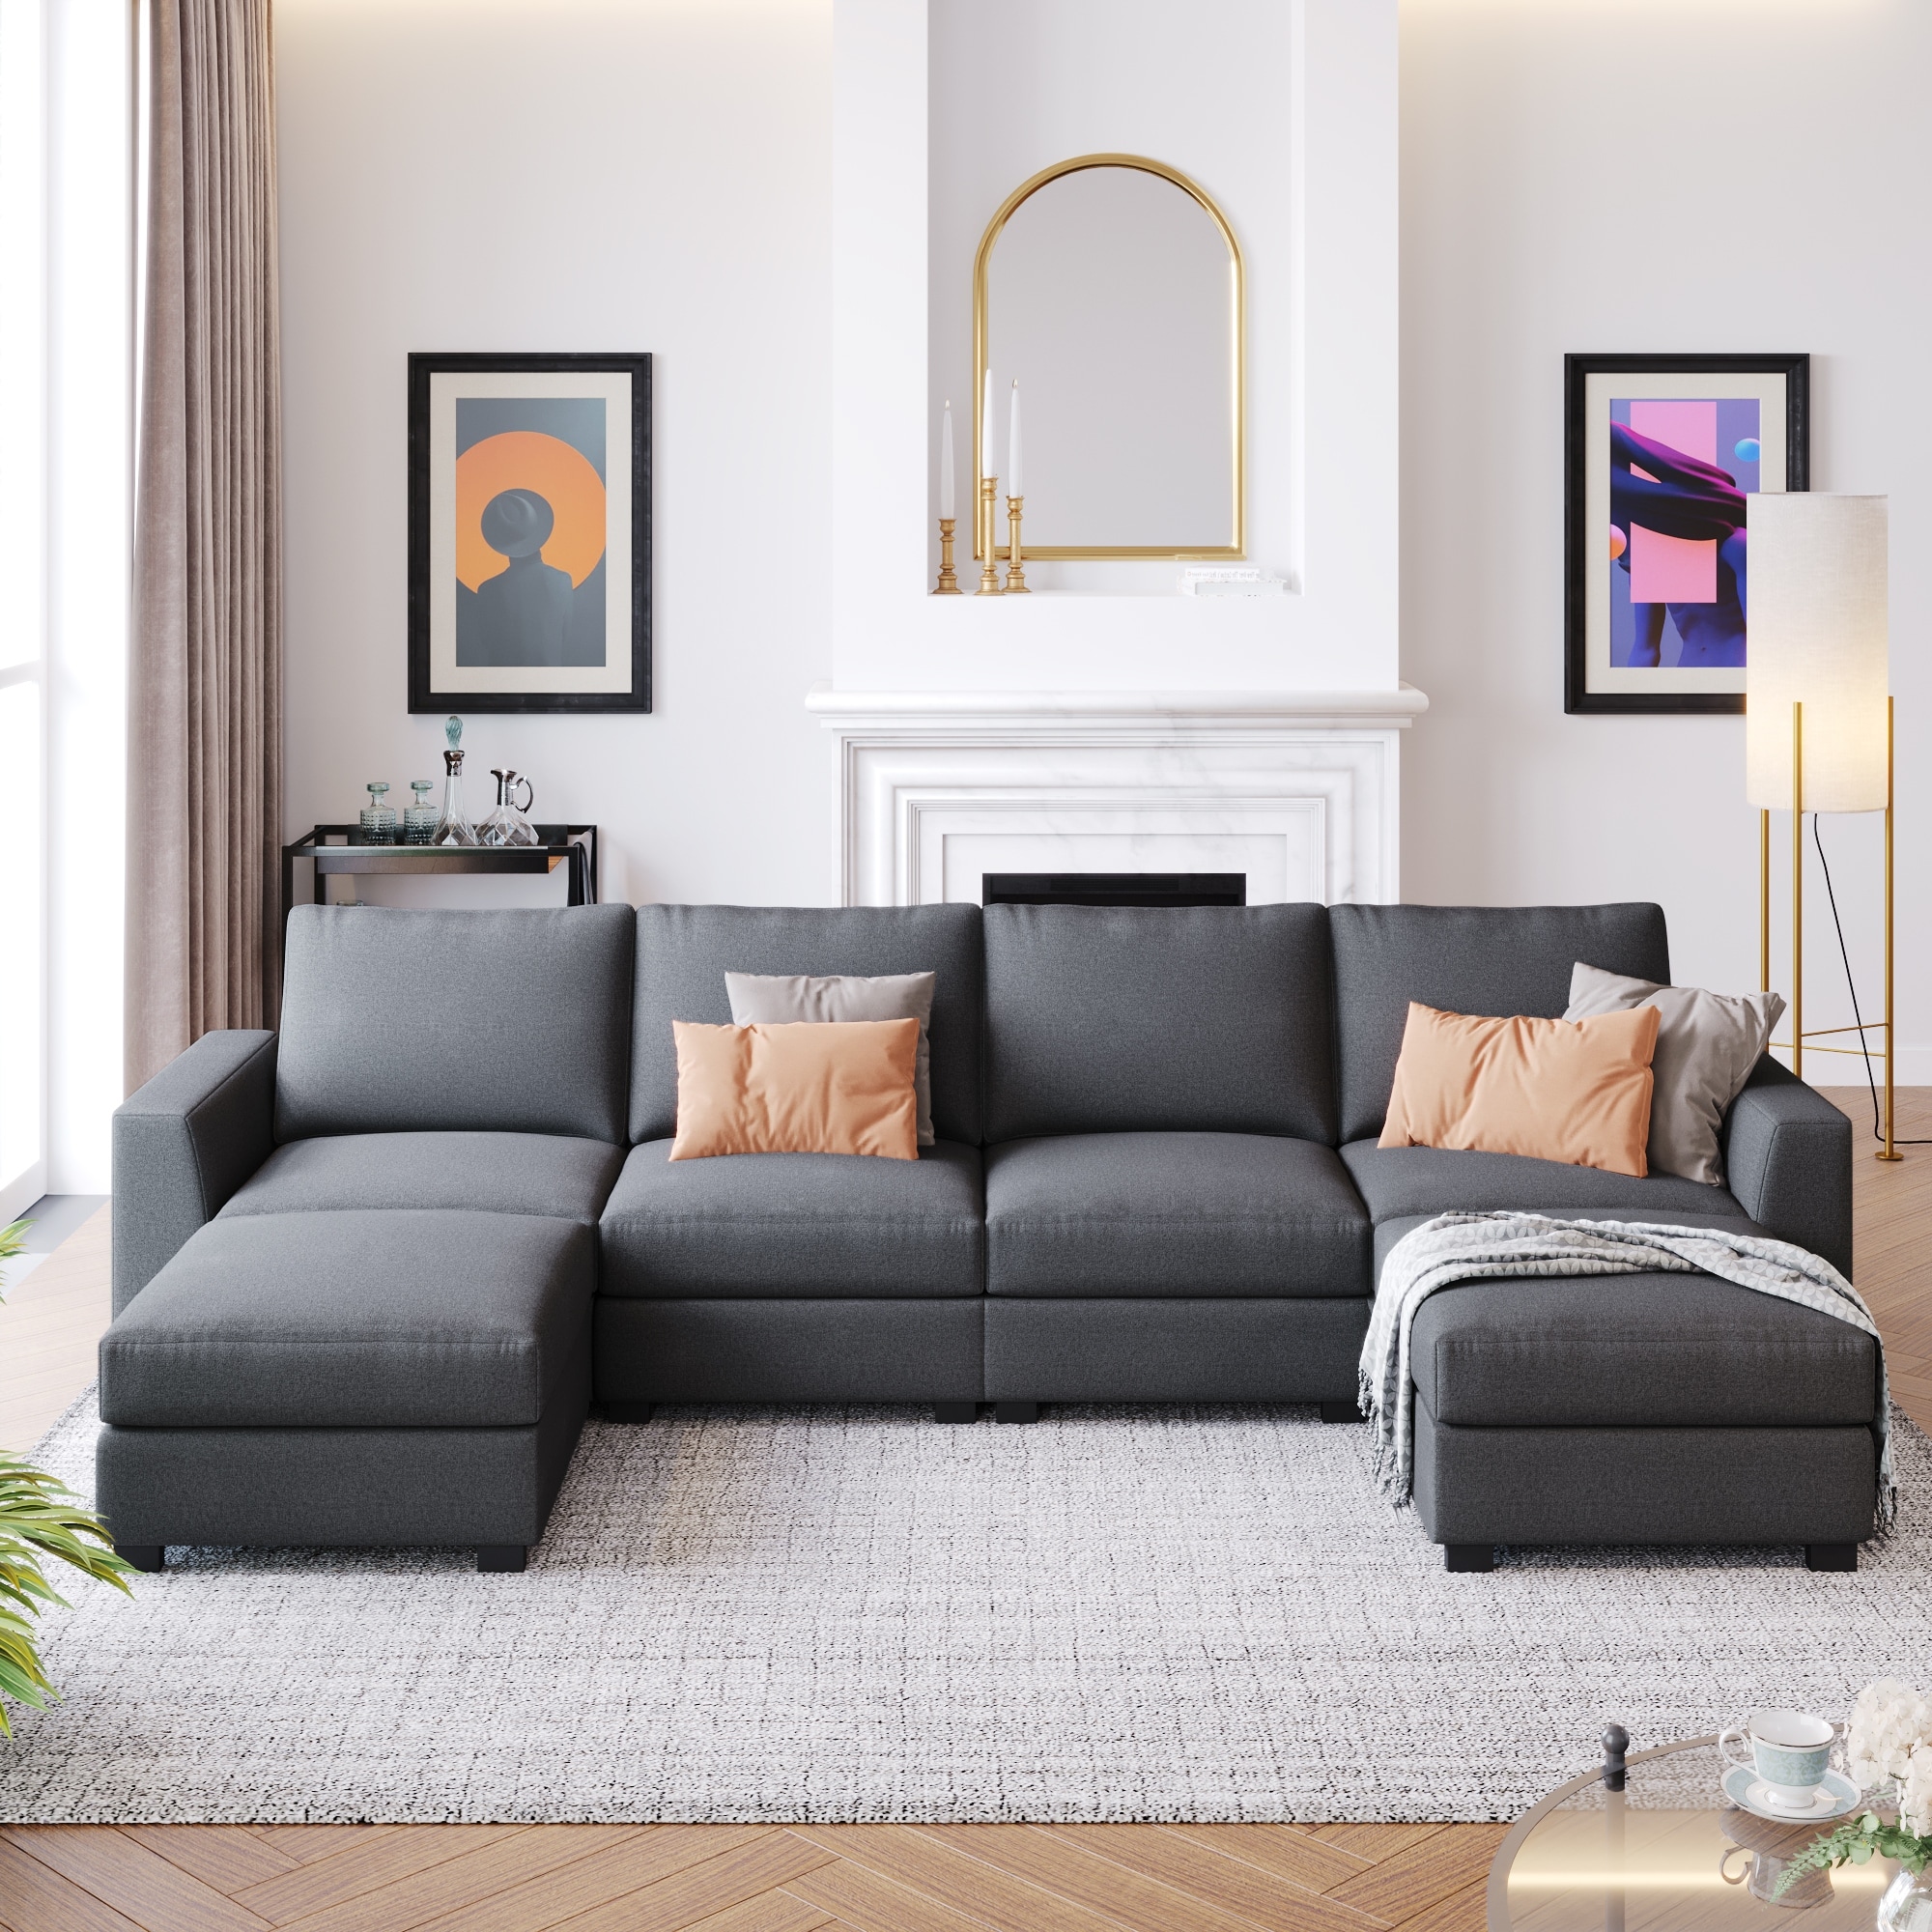 131w Modern 3 Pieces Upholstered U-shaped Sectional Sofa Sets With Removable Ottomans and Solid Wood Frame For Living Room